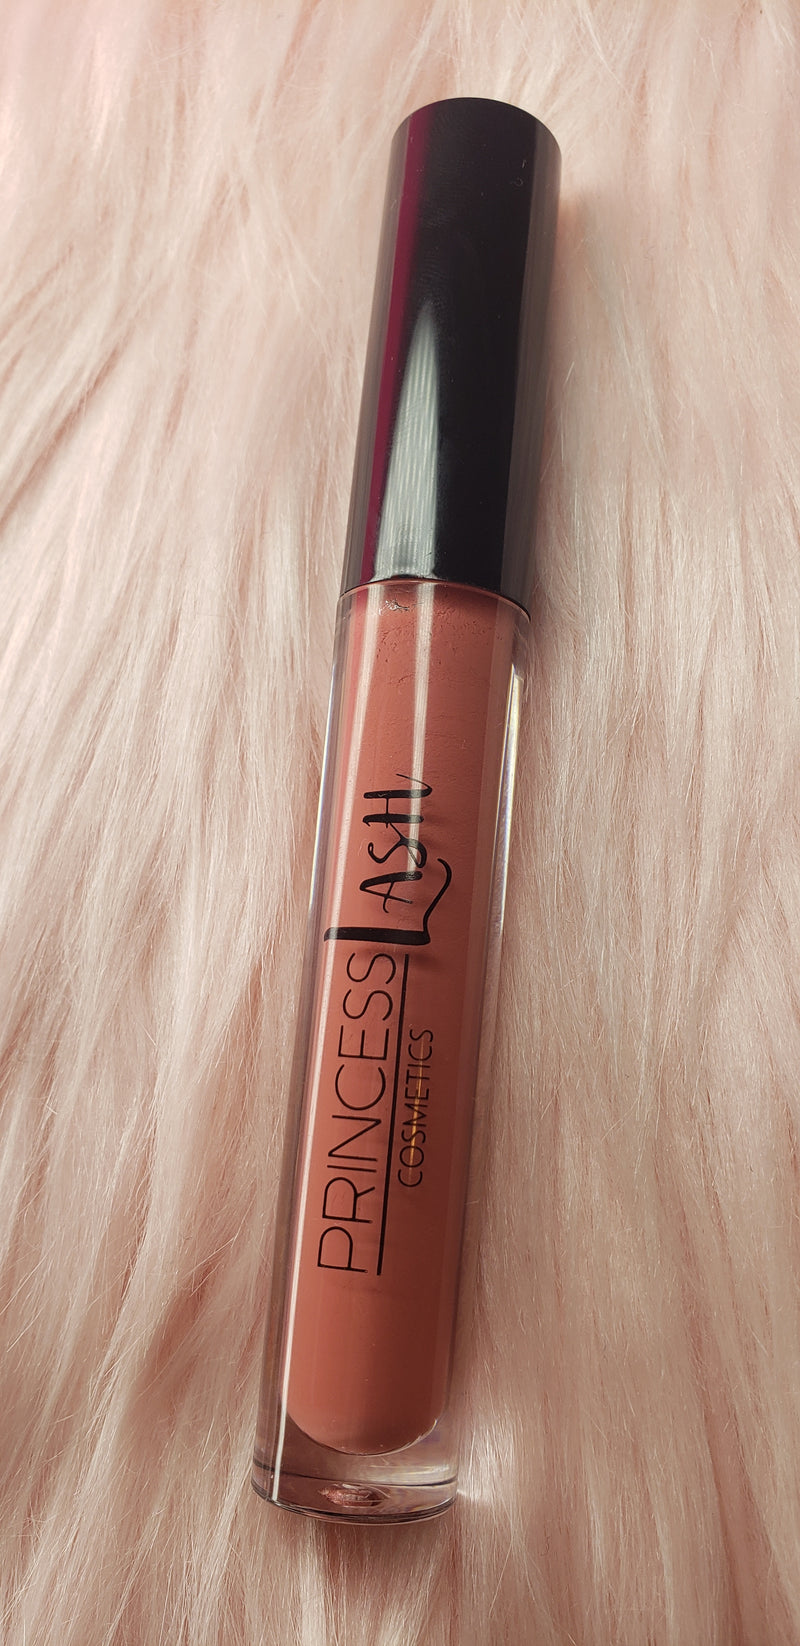 Queen Nude lip gloss from Princess Lash, LLC. A black owned cosmetic line